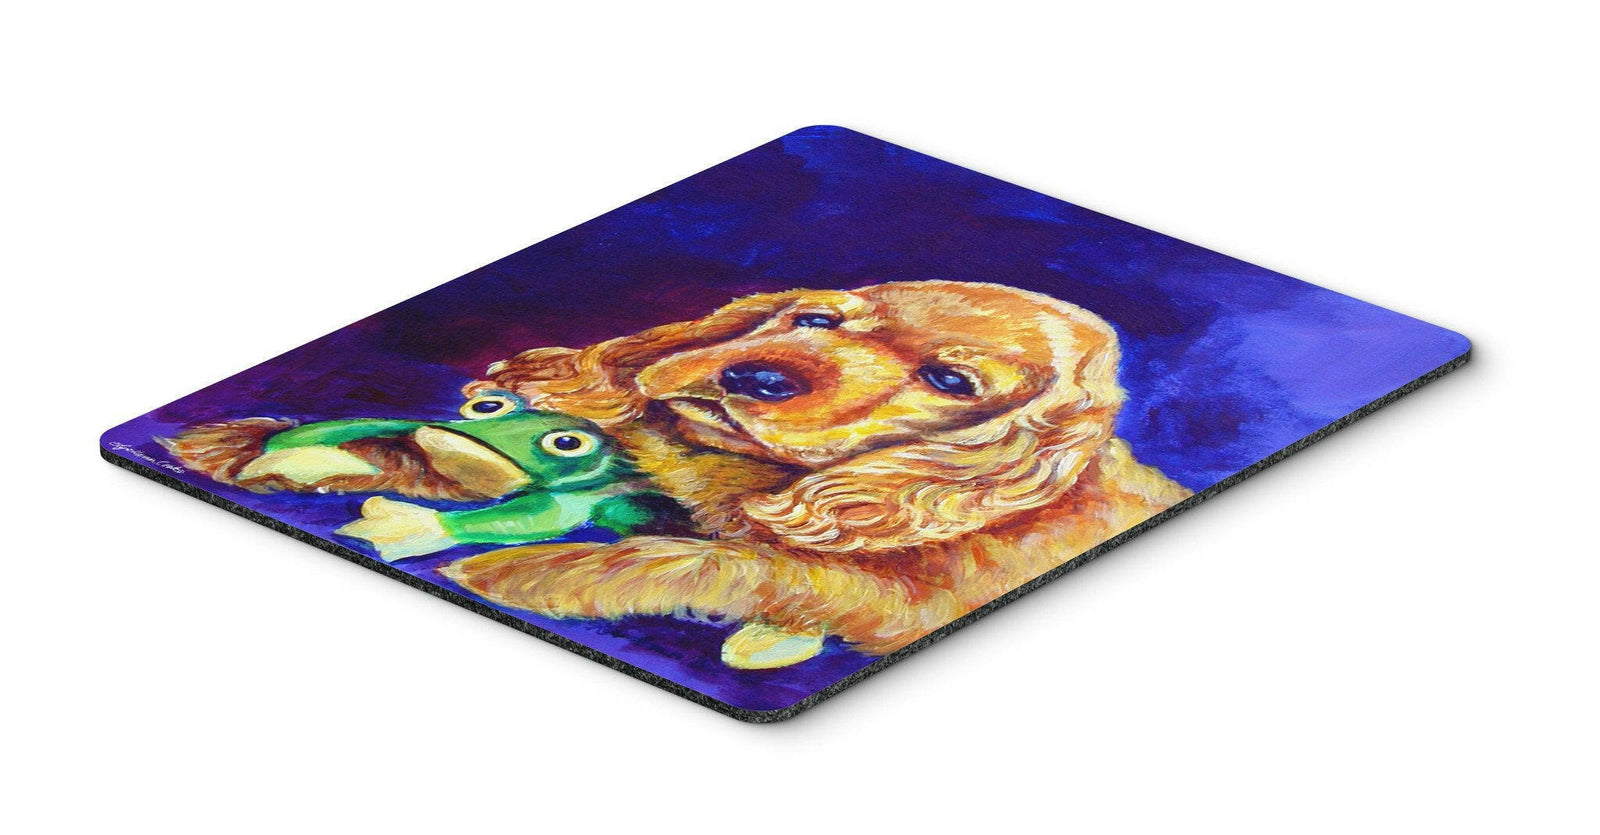 Cocker Spaniel with Frog Mouse Pad, Hot Pad or Trivet 7342MP by Caroline's Treasures